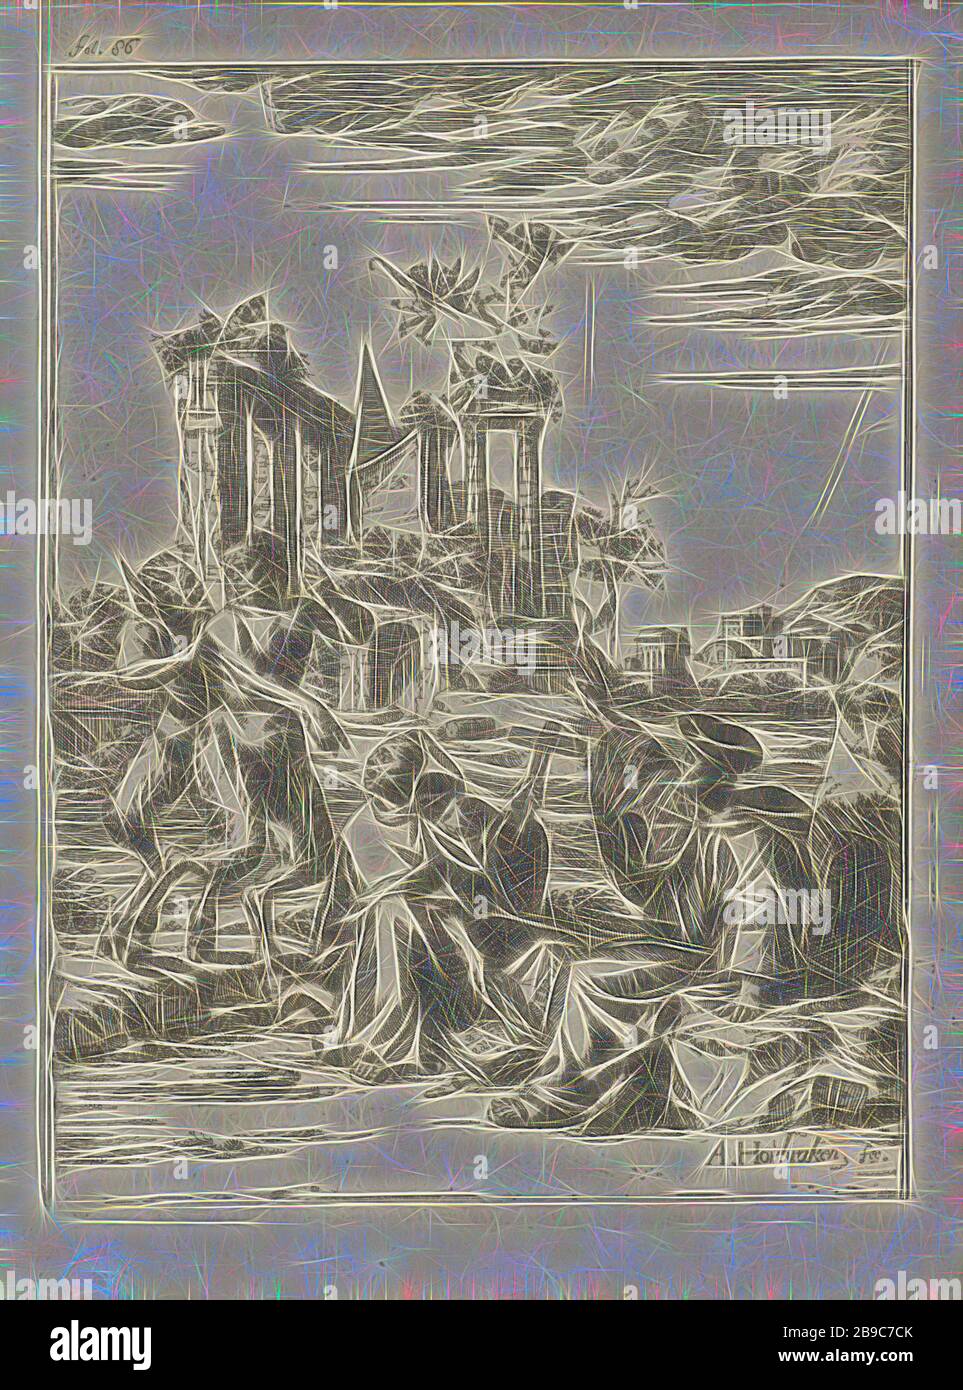 Two satyrs and two clergymen, Two satyrs with two clergymen in a landscape. The clergymen make repelling gestures and lift a crucifix. In the background a ruin above which angels and devils float. Above right: fol 4. Print used in the book: Scene of Accidents by Lambert van den Bos with a total of twenty prints by Arnold Houbraken., Satyr (s) (in general), landscape with ruins (city-landscape) with figures, staffage), monk (s), friar (s) (devil (s)), cross as symbol of Christ, Arnold Houbraken (mentioned on object), 1681 - 1683 and/or 1699, paper, etching, h 193 mm × w 144 mm, Reimagined by Gi Stock Photo